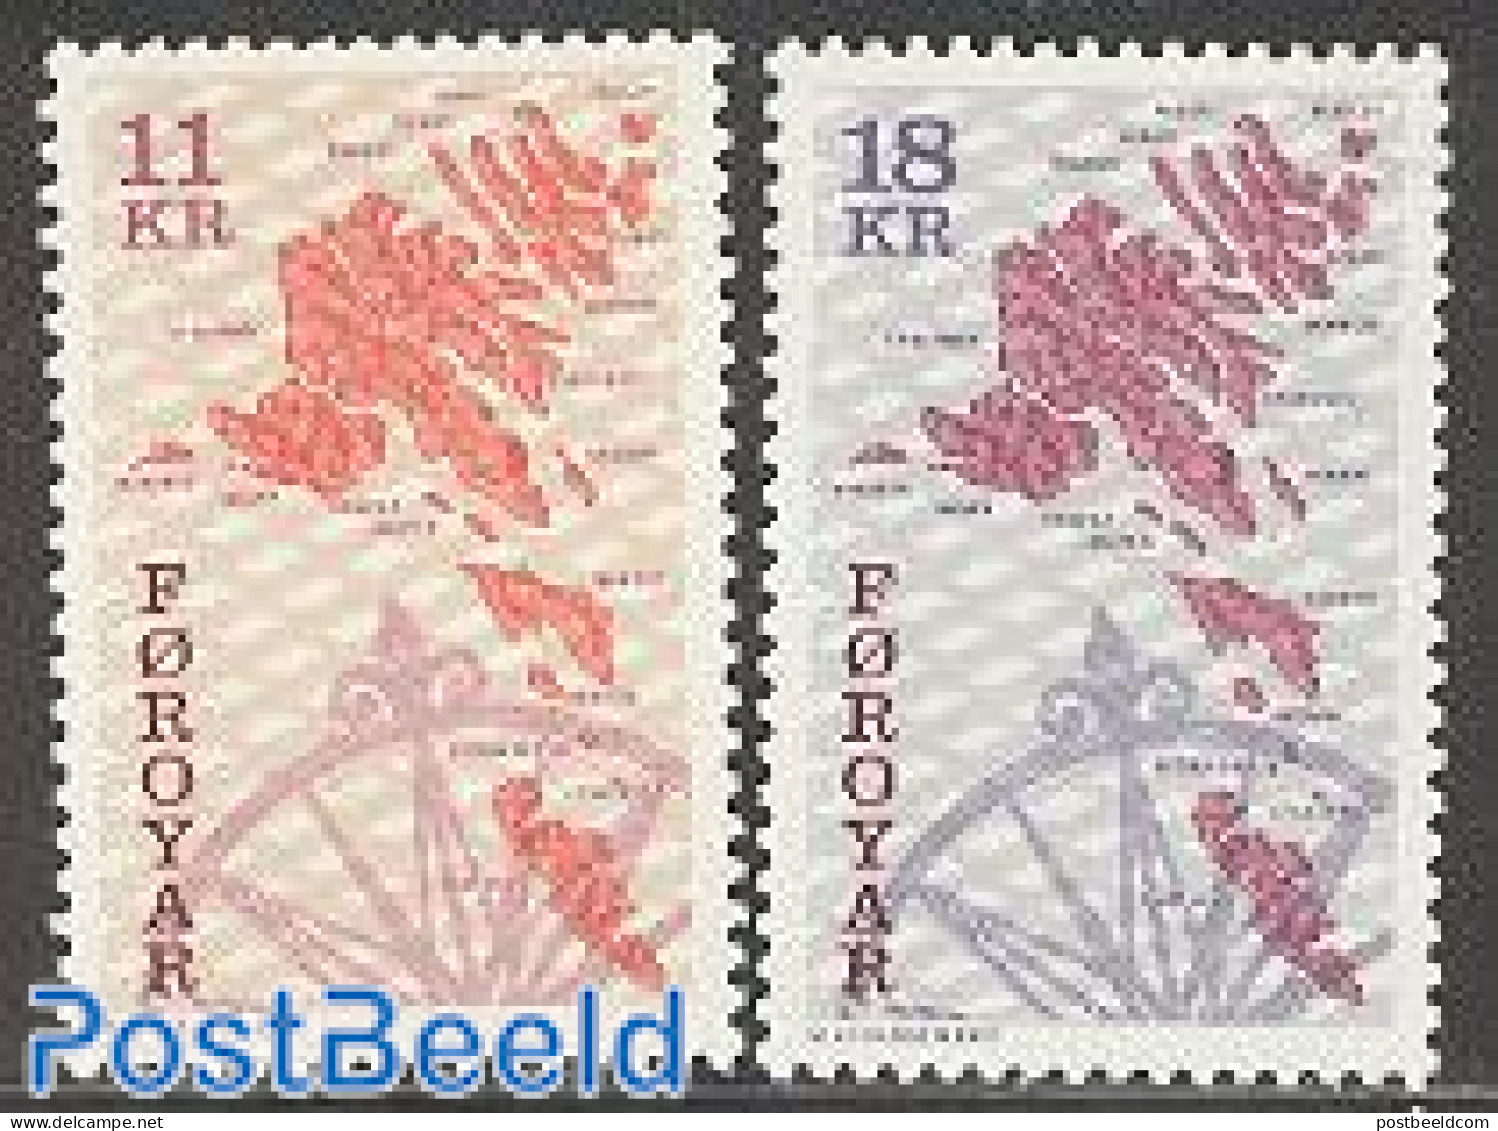 Faroe Islands 1997 Definitives, Maps 2v, Mint NH, Various - Maps - Geography